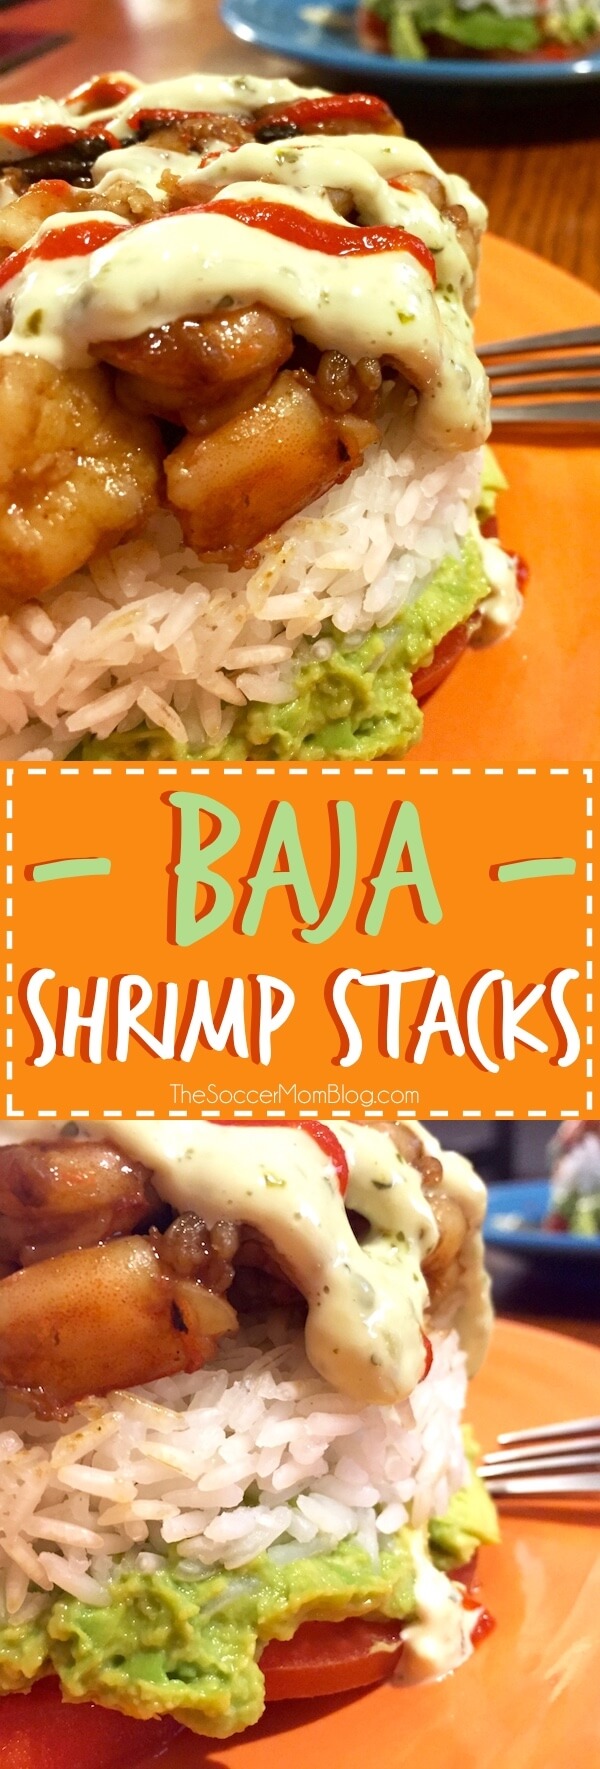 This is one of those recipes that will really WOW 'em!! These Baja Shrimp Stacks are zesty, healthy, and super impressive! (But actually easy to make!)